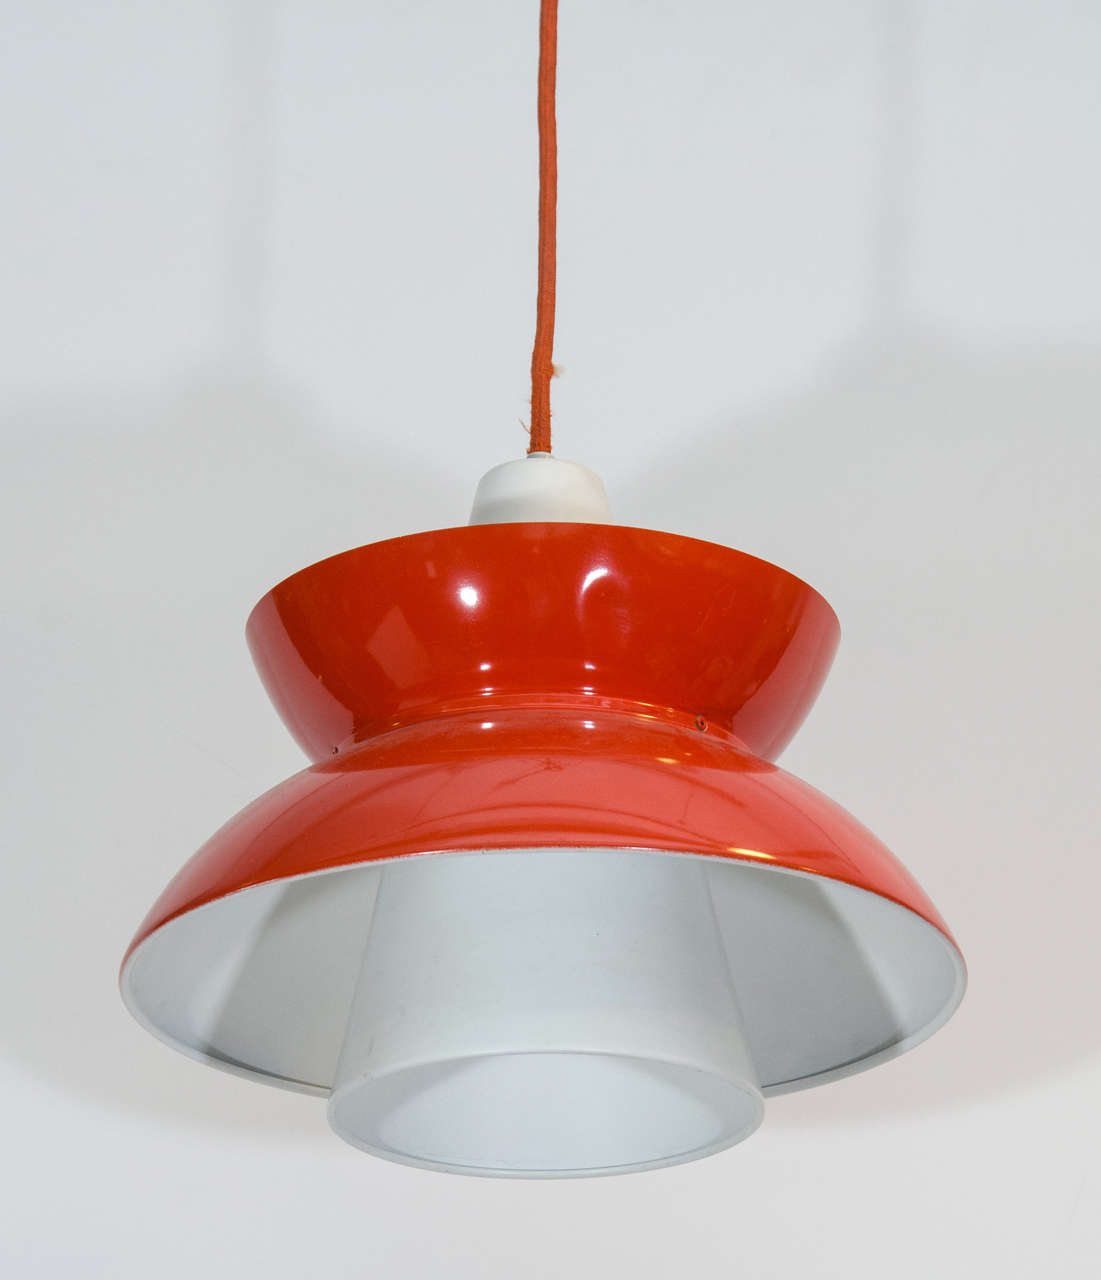 A vintage pendant light by designer Jorn Utzon in red with a white interior. Wiring and sockets to US standard. Very good condition, consistent with age and use. 